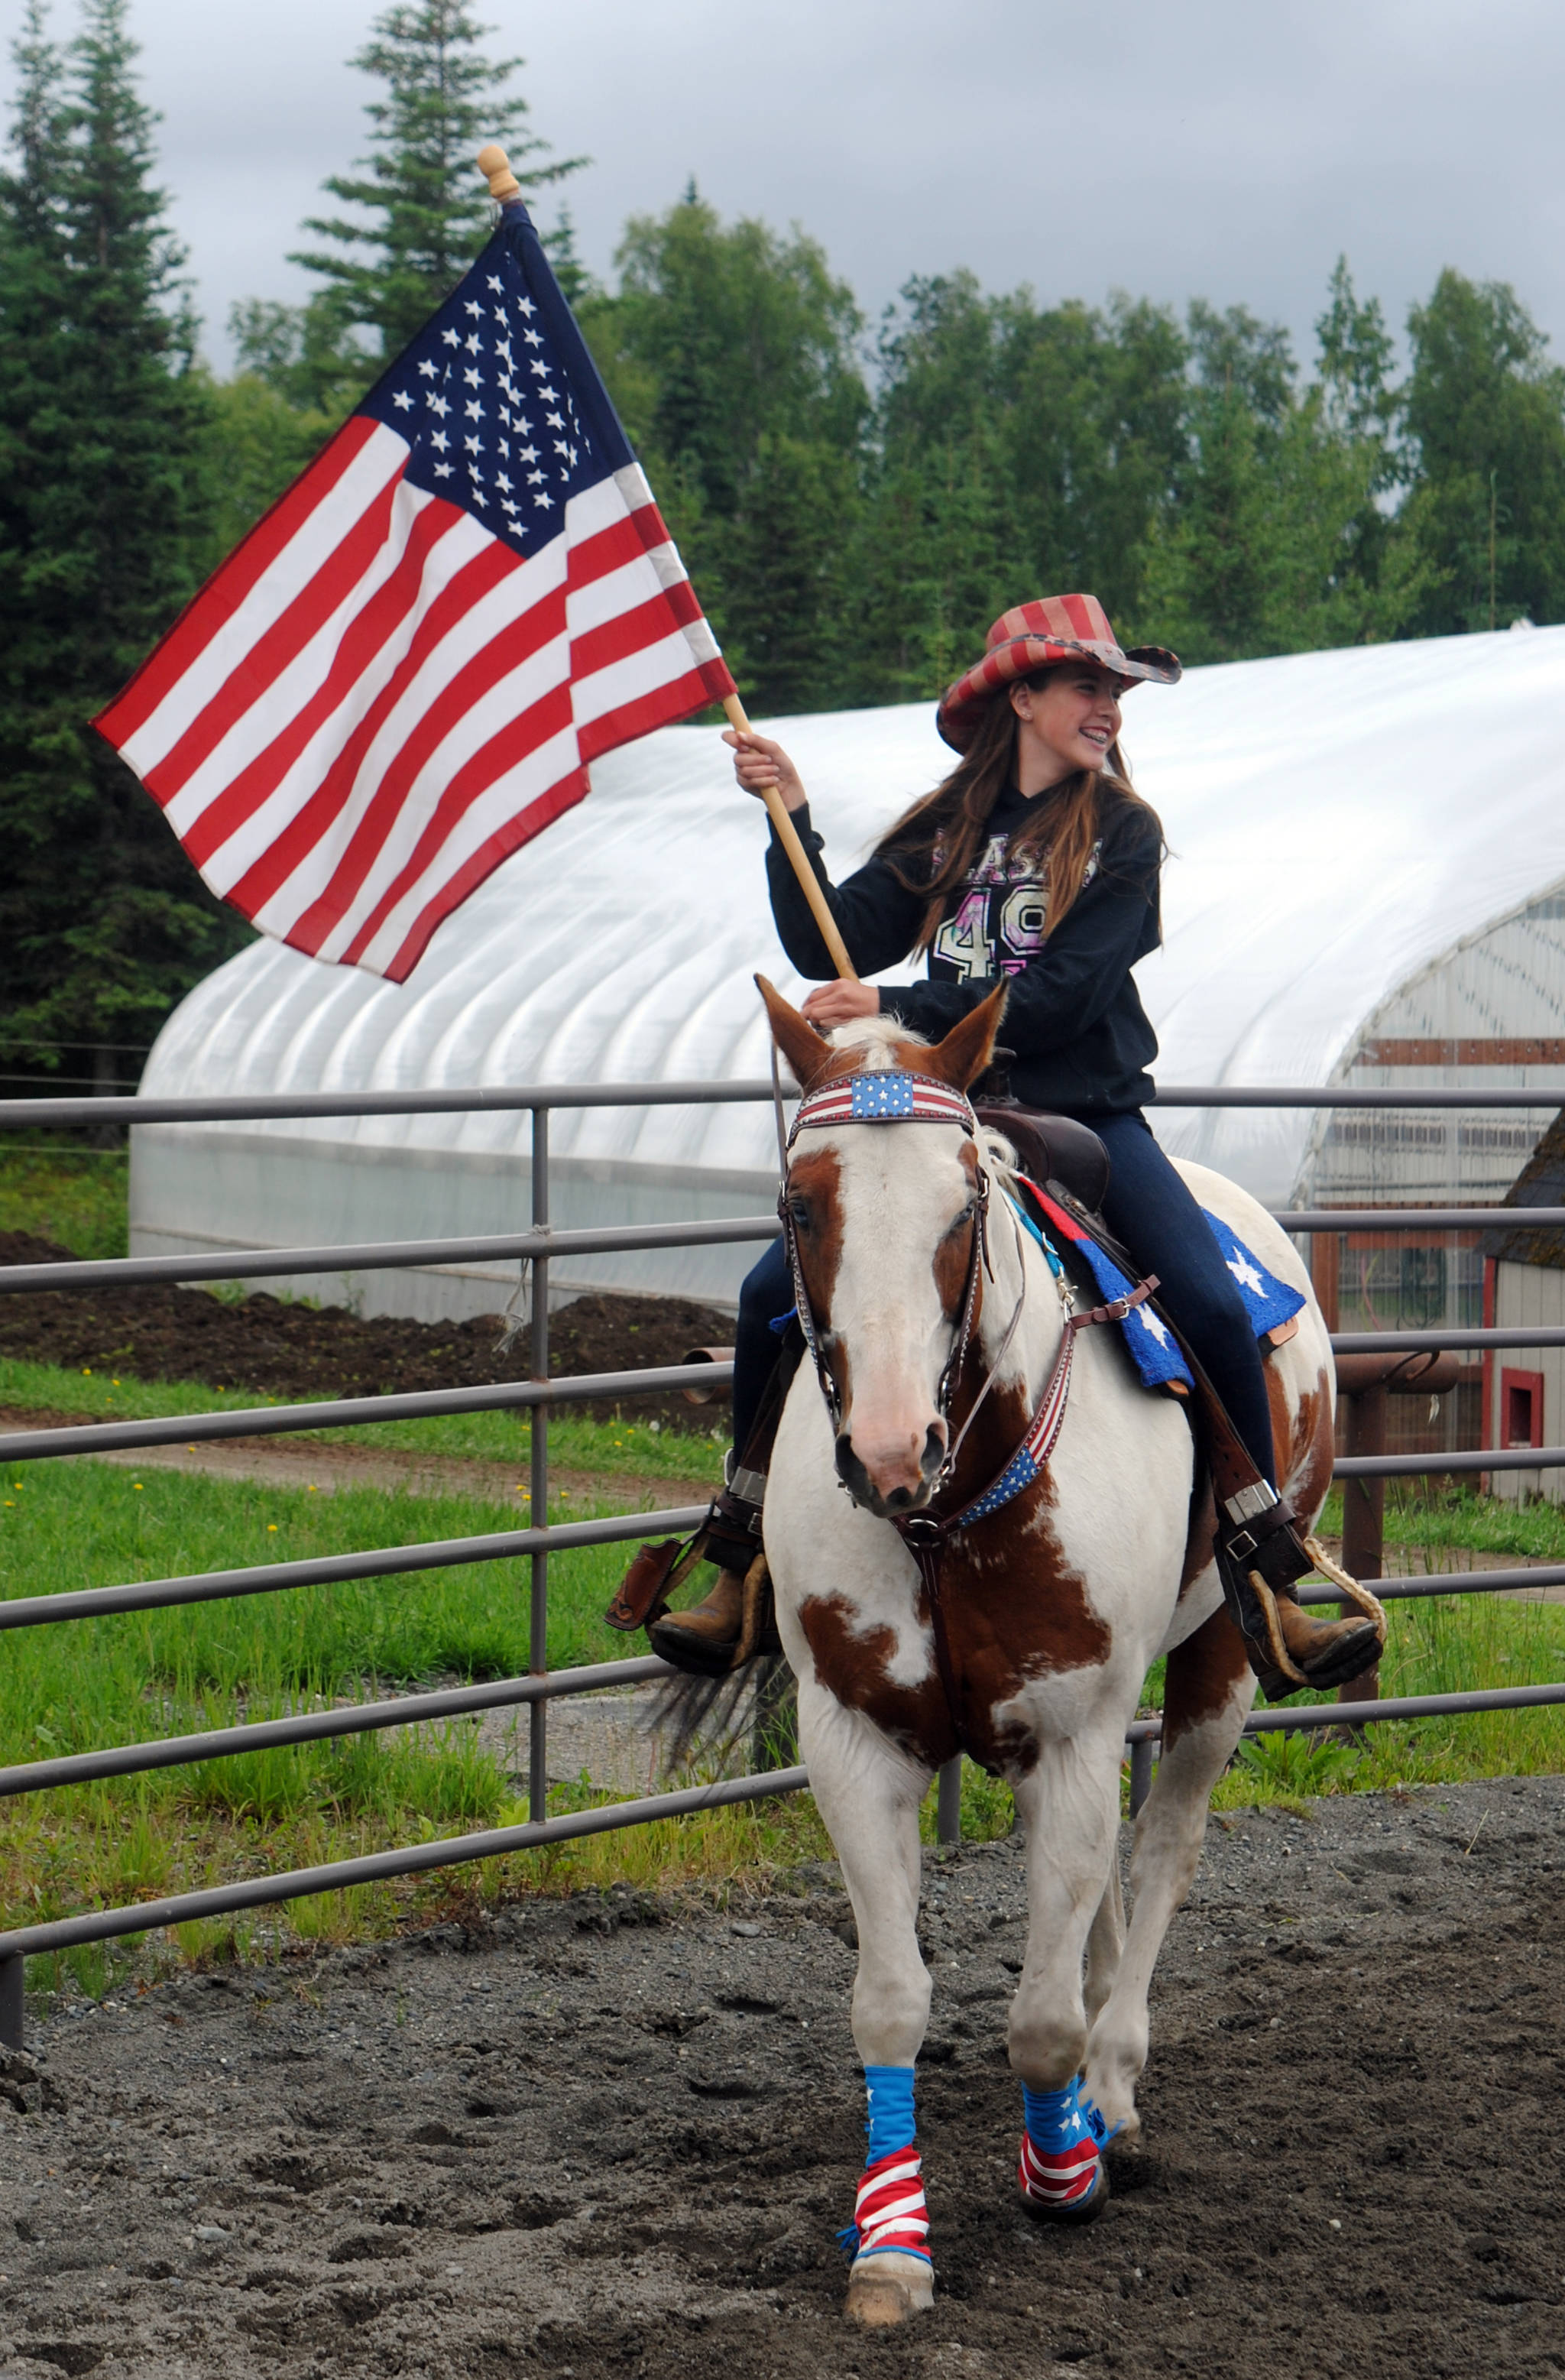 Madelyn Barkman practices horseback riding at Alaska C&C Horse Adventures in Soldotna on Monday in preparation for the Kenai Fourth of July Parade, which begins today at 11 a.m. (Photo by Kat Sorensen/Peninsula Clarion)